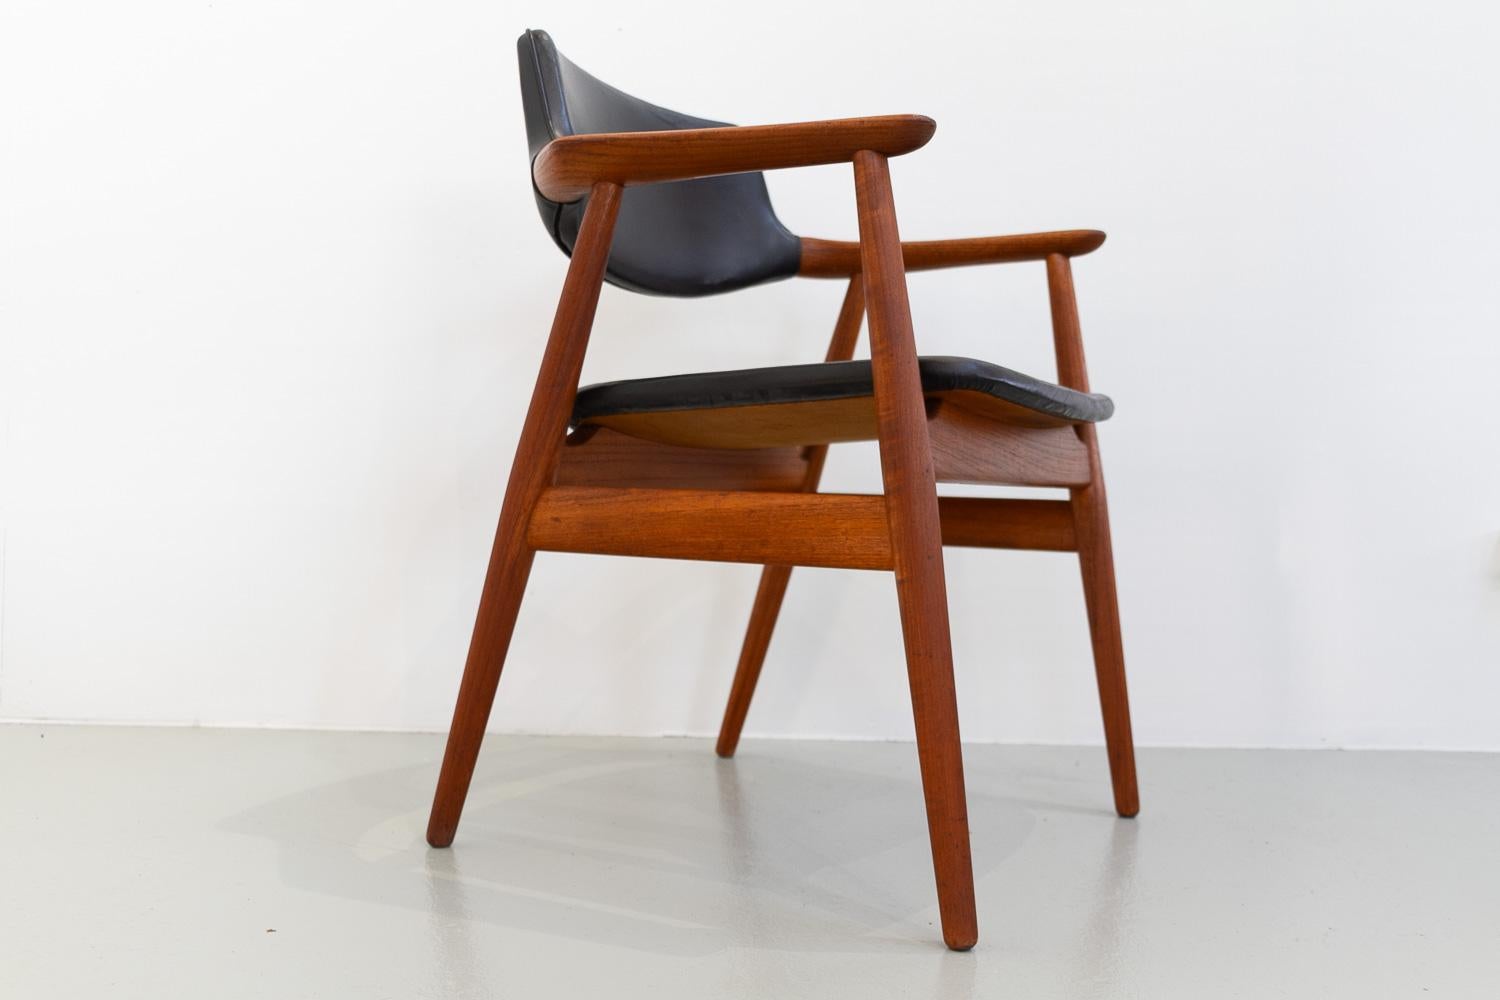 Mid-Century Danish Teak GM11 Armchair by Svend Aage Eriksen, 1960s.
Original vintage GM 11 chair in solid teak and black leather designed by Danish architect Svend Åge Eriksen for Glostrup Møbelfabrik, Denmark in the 1960s.
This is a very beautiful,